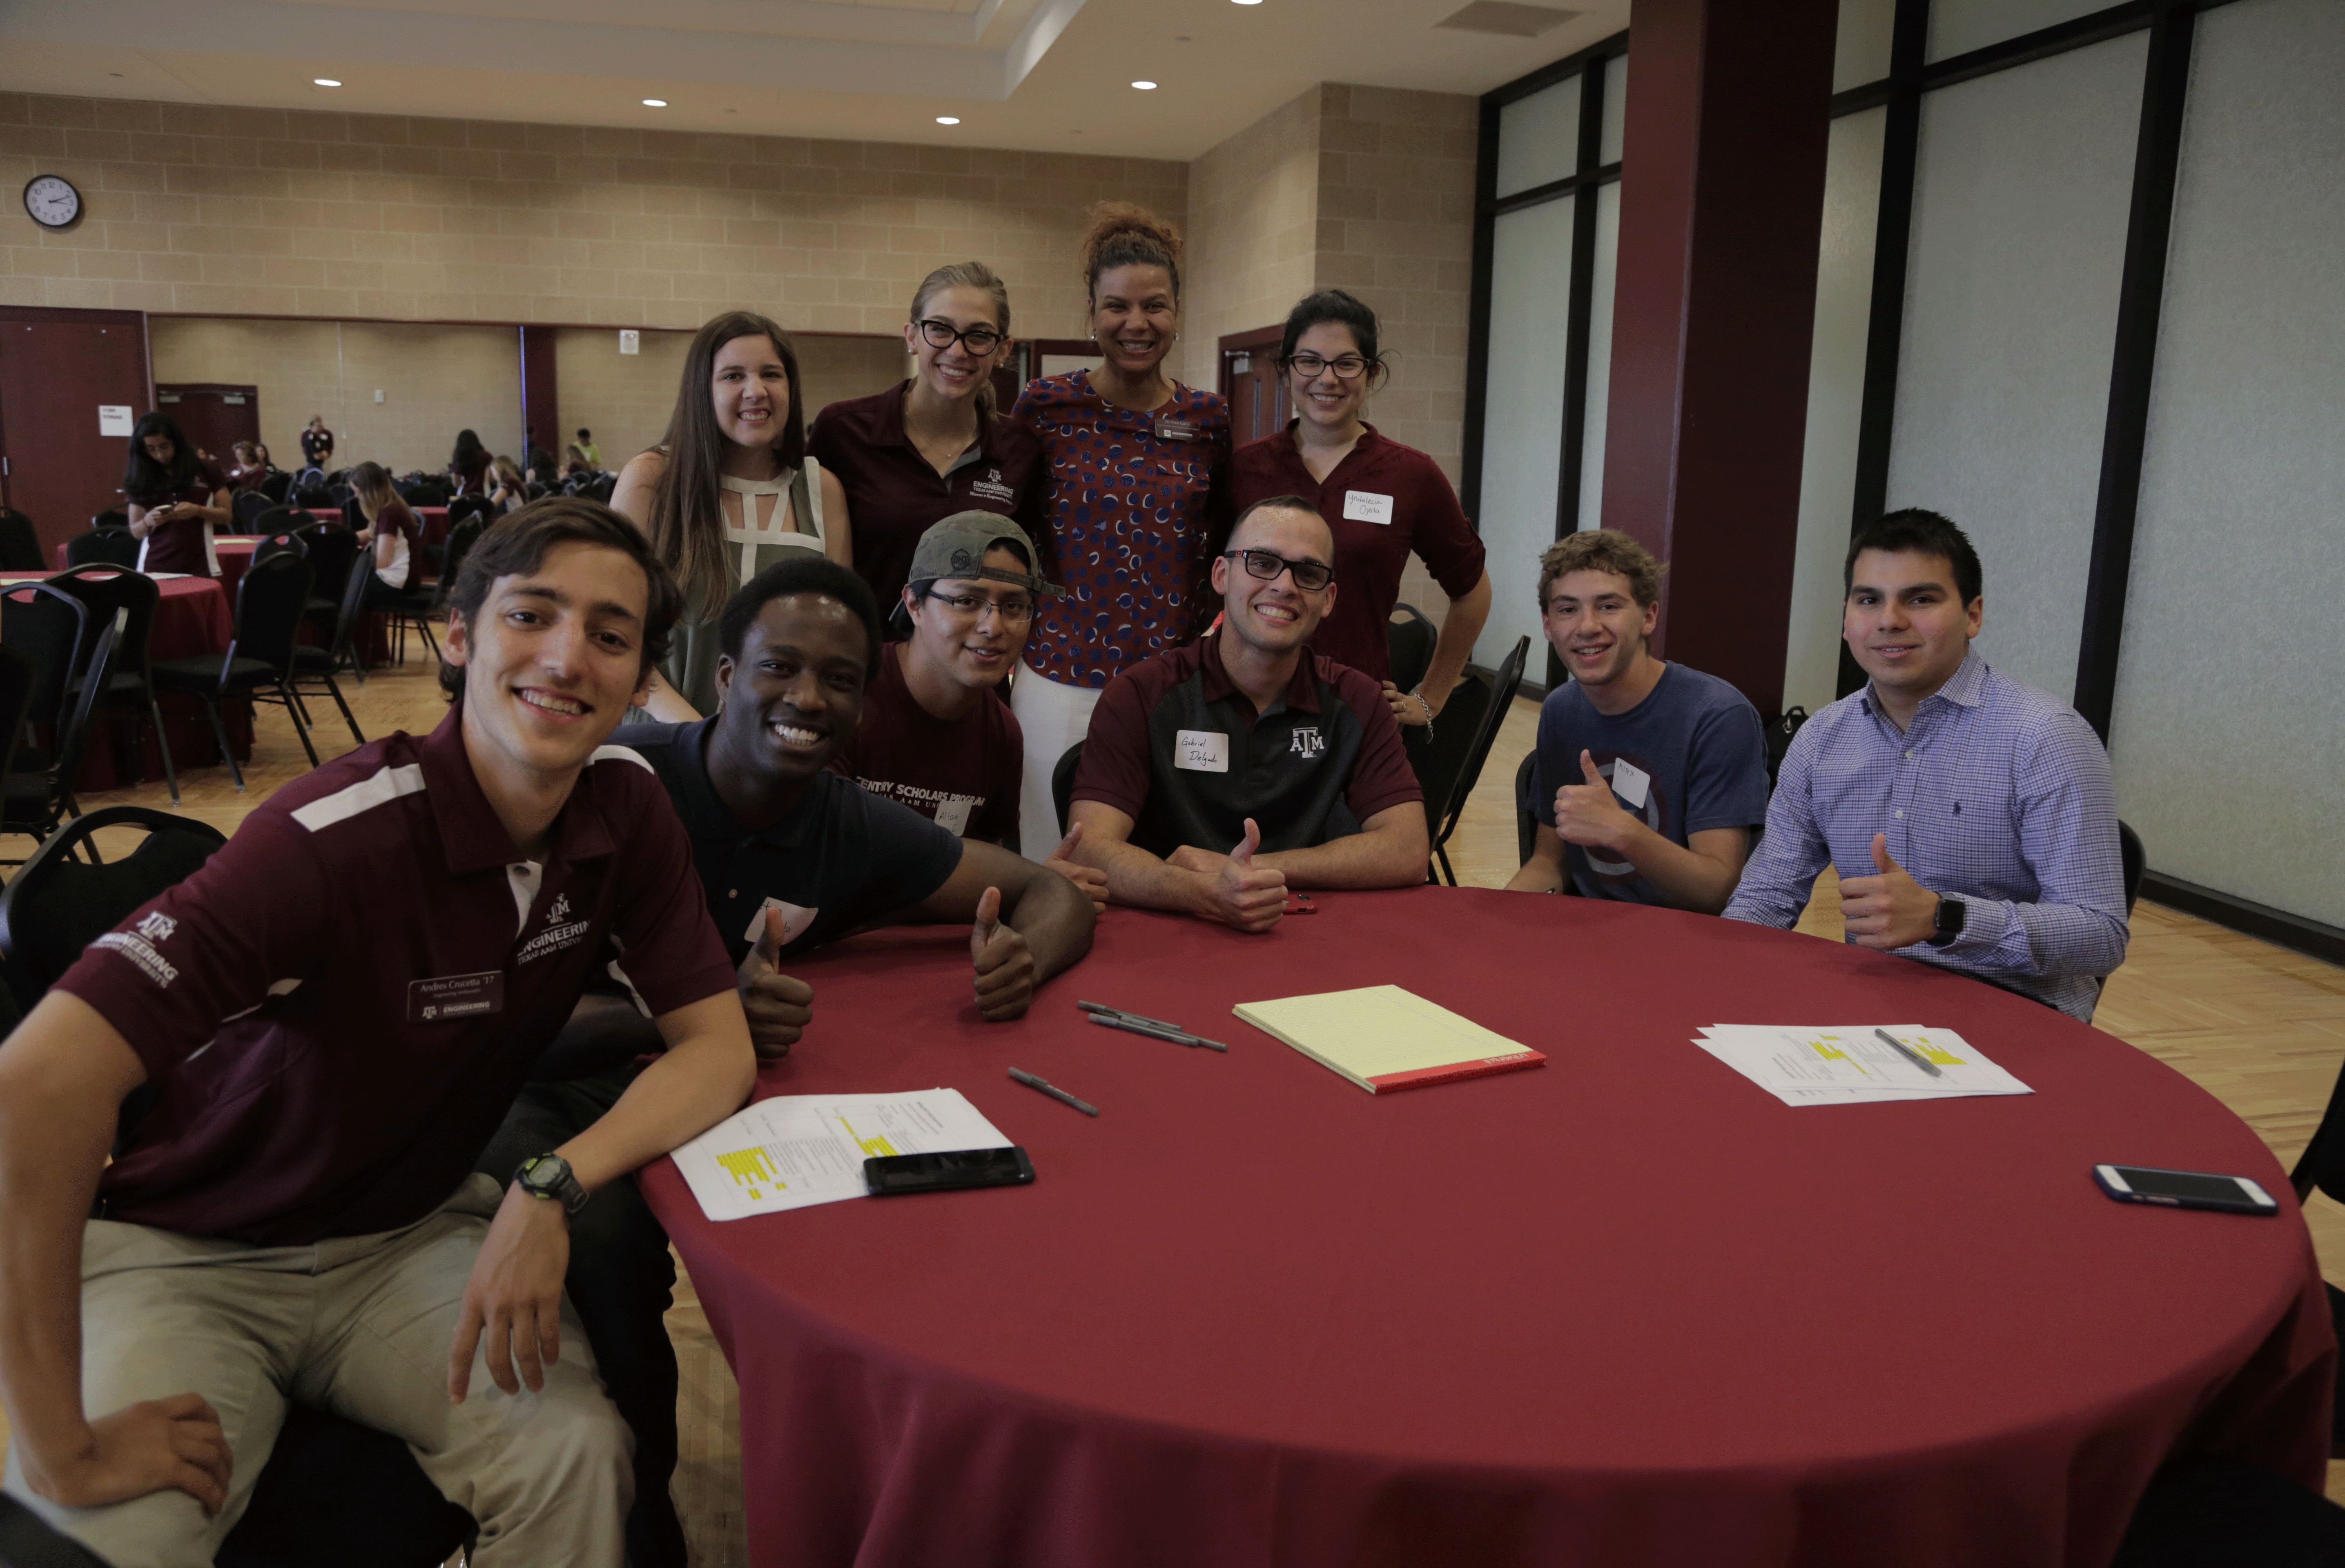 Group of six smiling male students sitting at round table with maroon table cloth. All are giving a thumbs up to the camera. Four women in business casual clothes are standing behind them smiling.